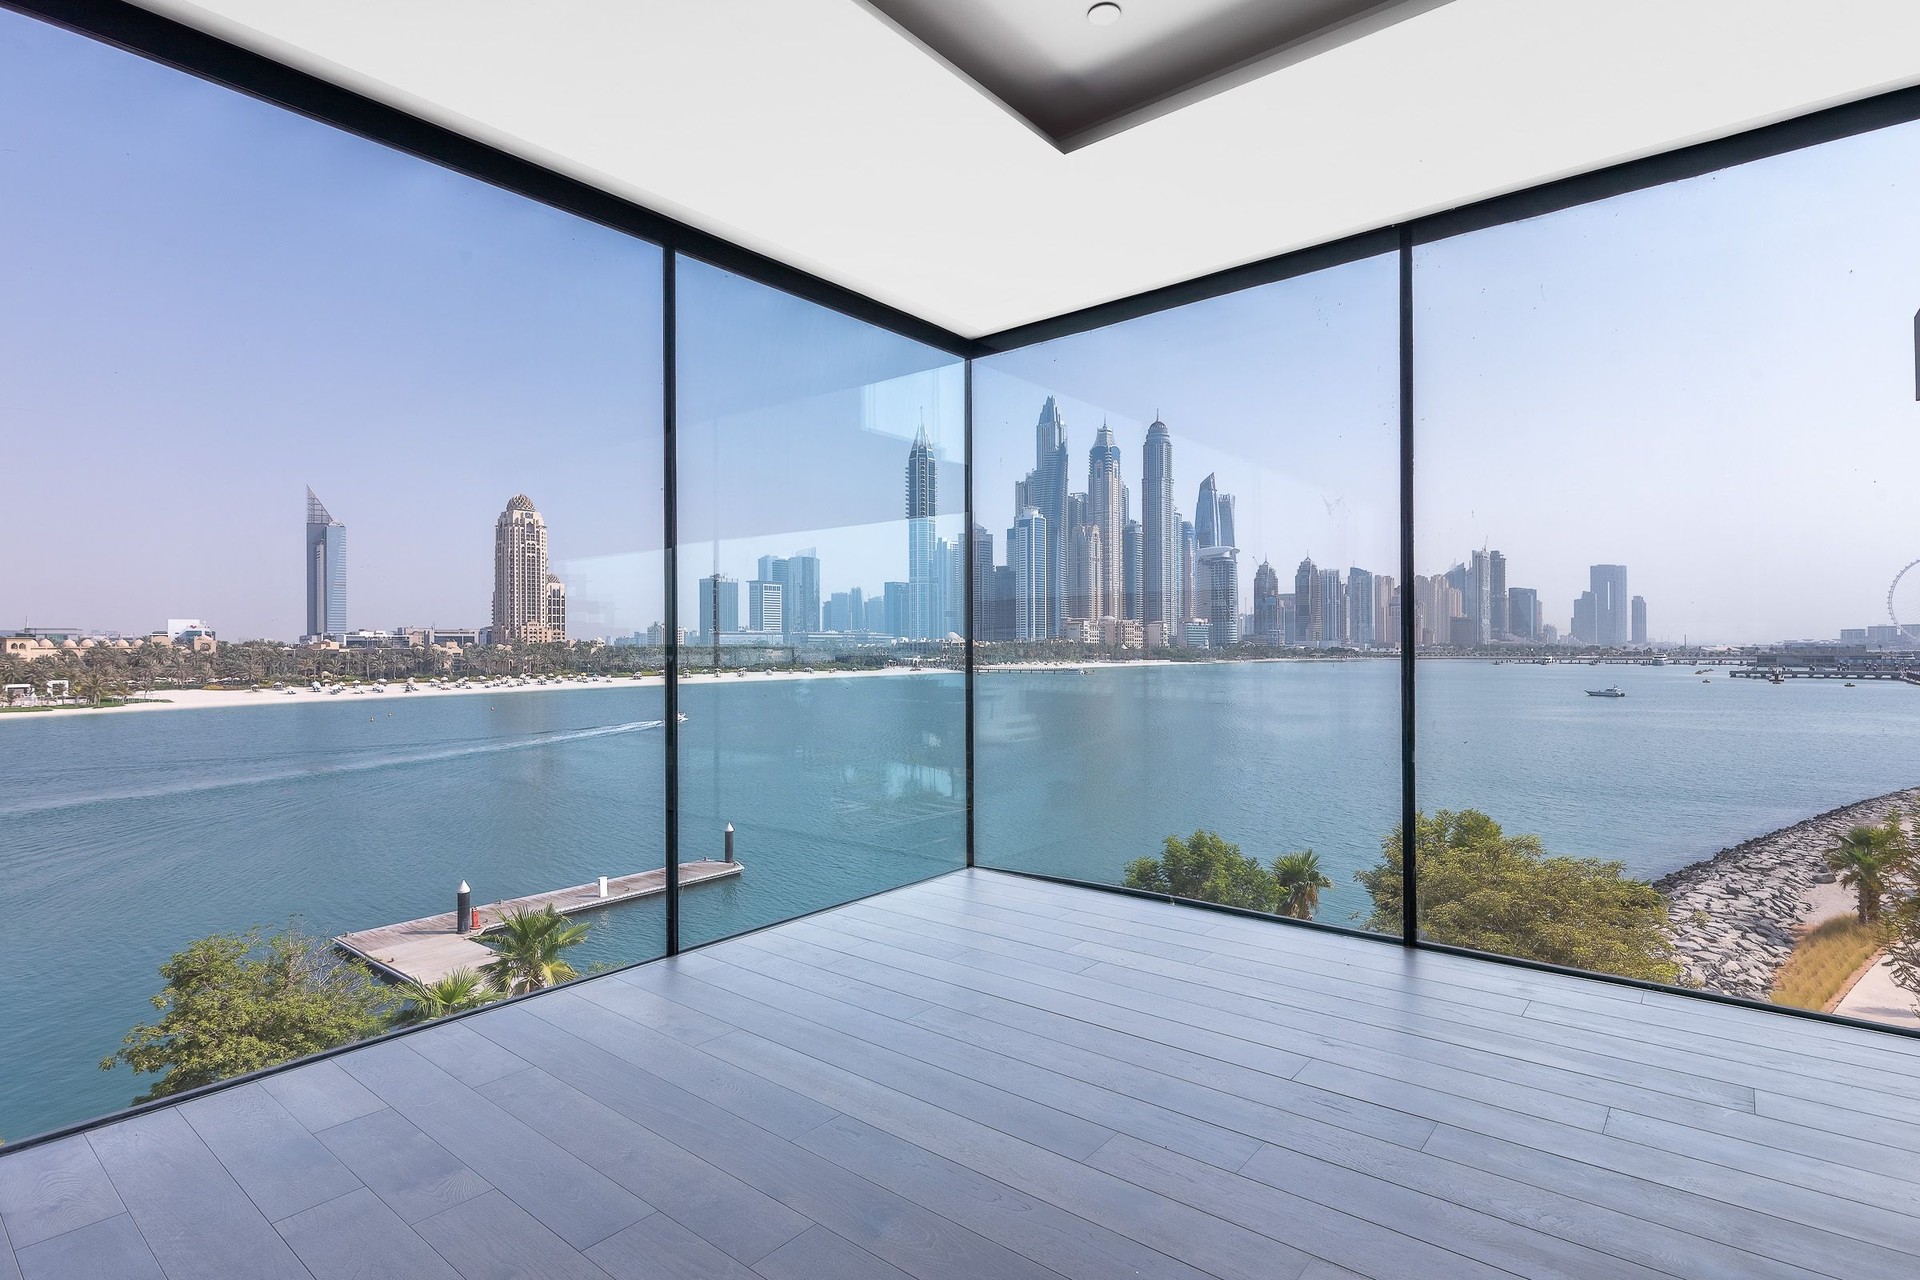 Exclusive Resale Luxury Apartment on Palm Jumeirah: Image 1